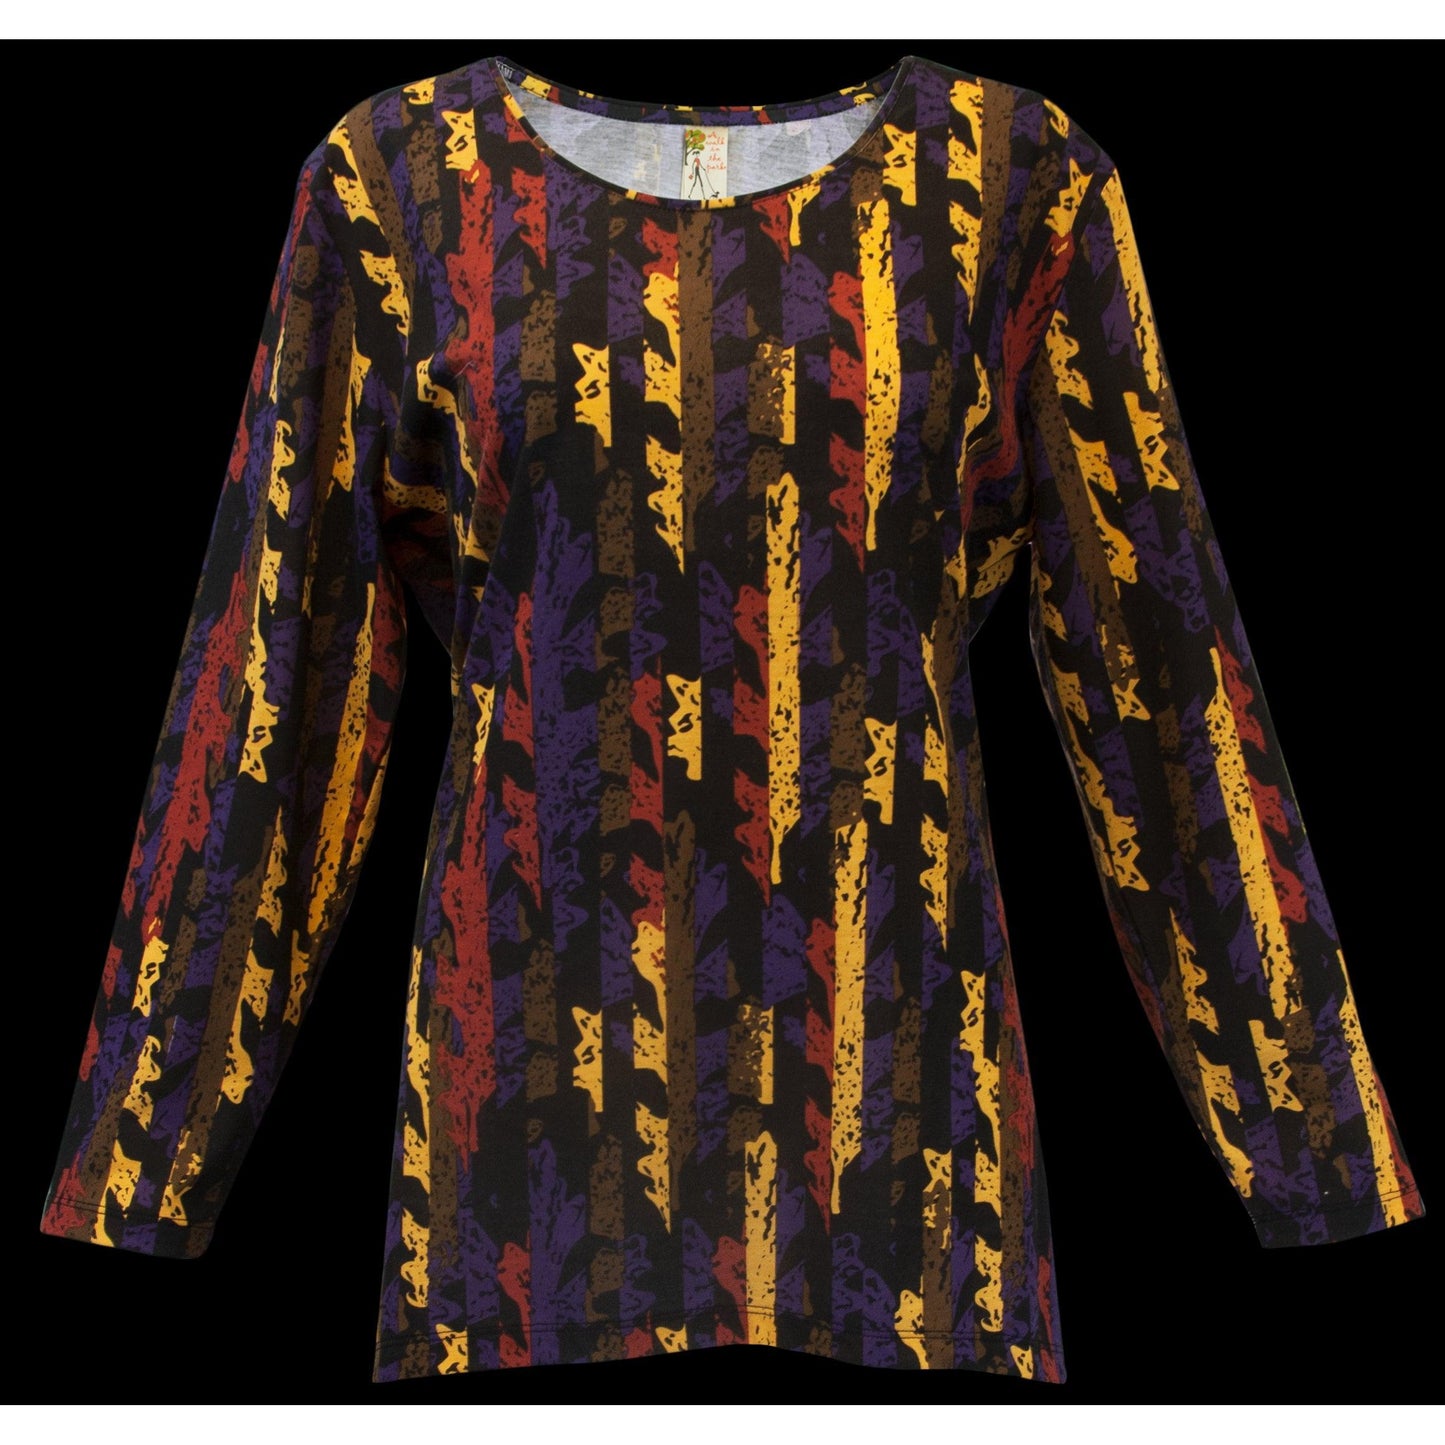 "Leaf Divide" Printed Asymmetrical Tunic, by A Walk In the Park®